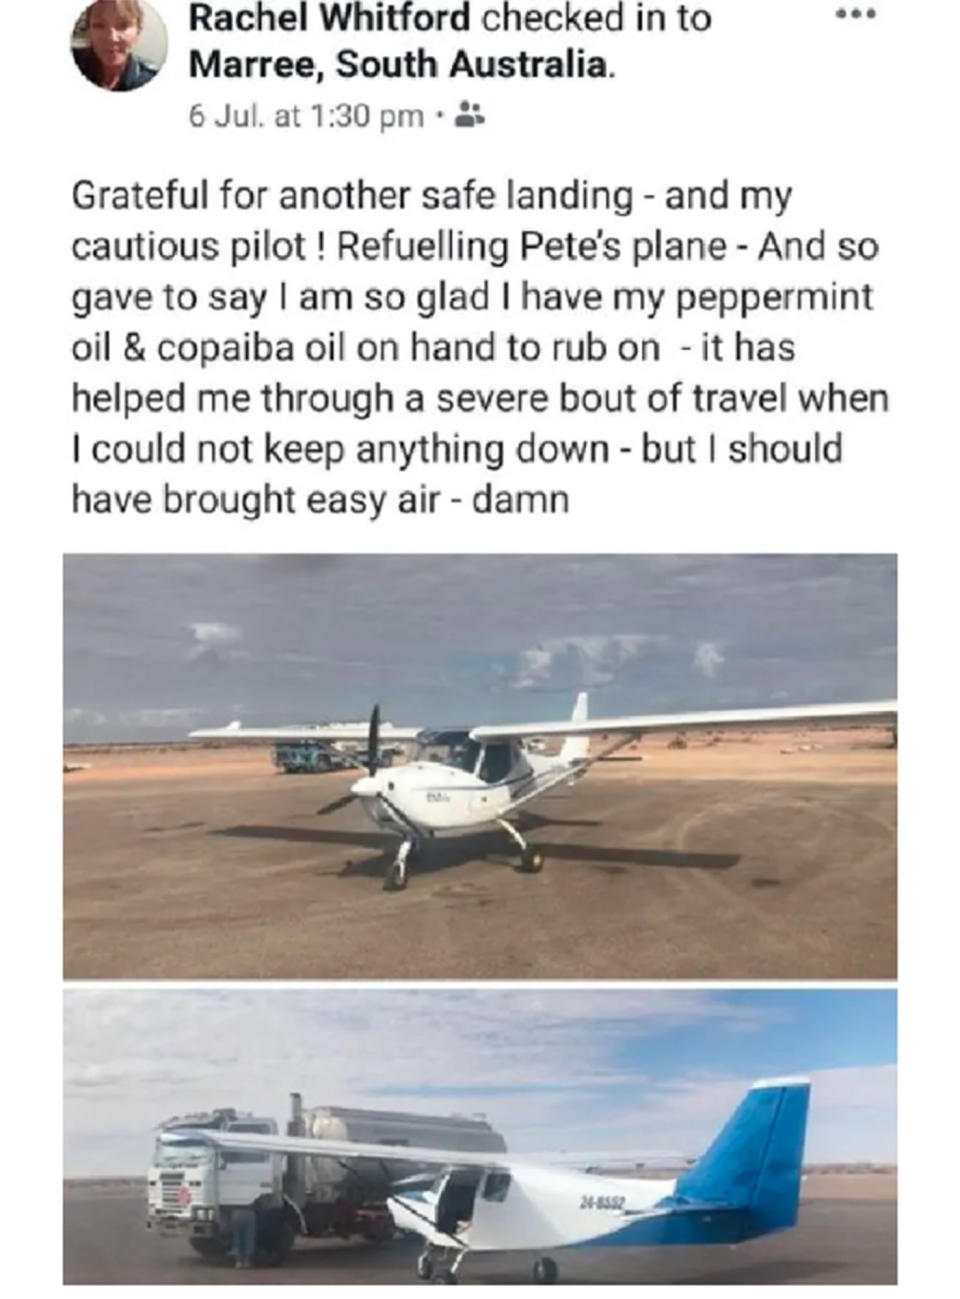 Rachel Whitford's Facebook post thanking her pilot for “another safe landing” hours before their plane crashed in outback South Australia. Source: Facebook